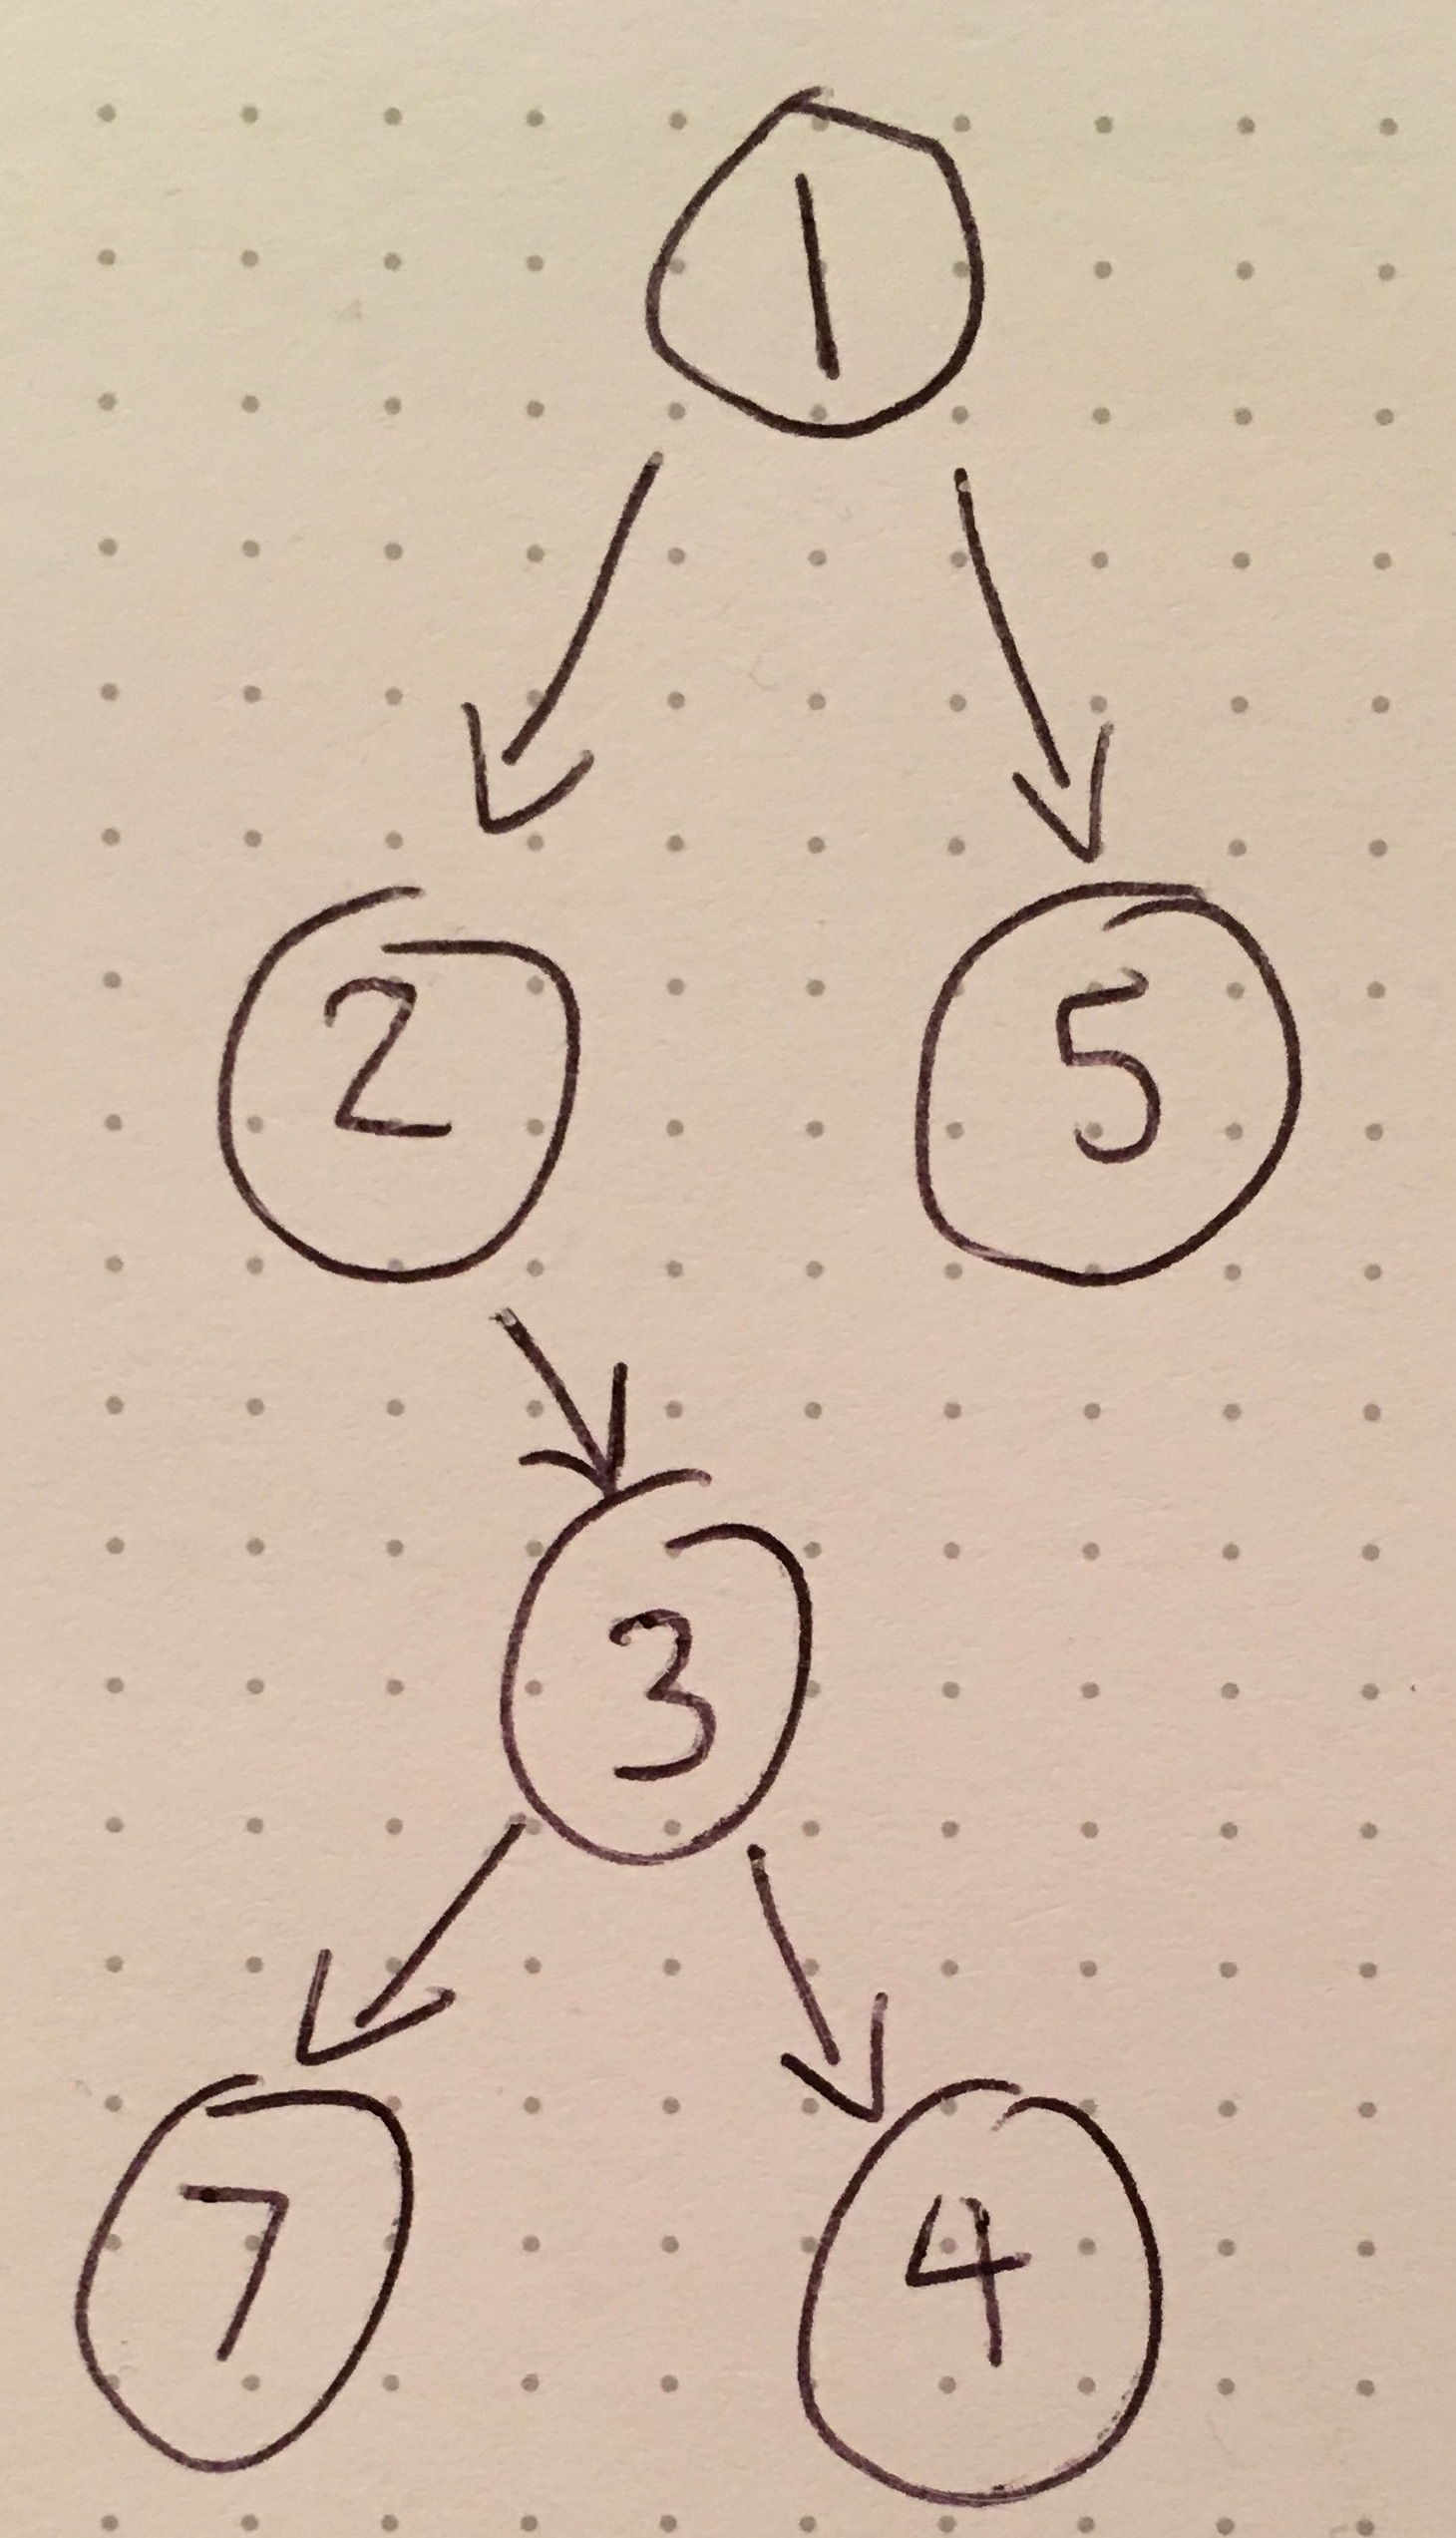 Random numbers displayed as a tree structure